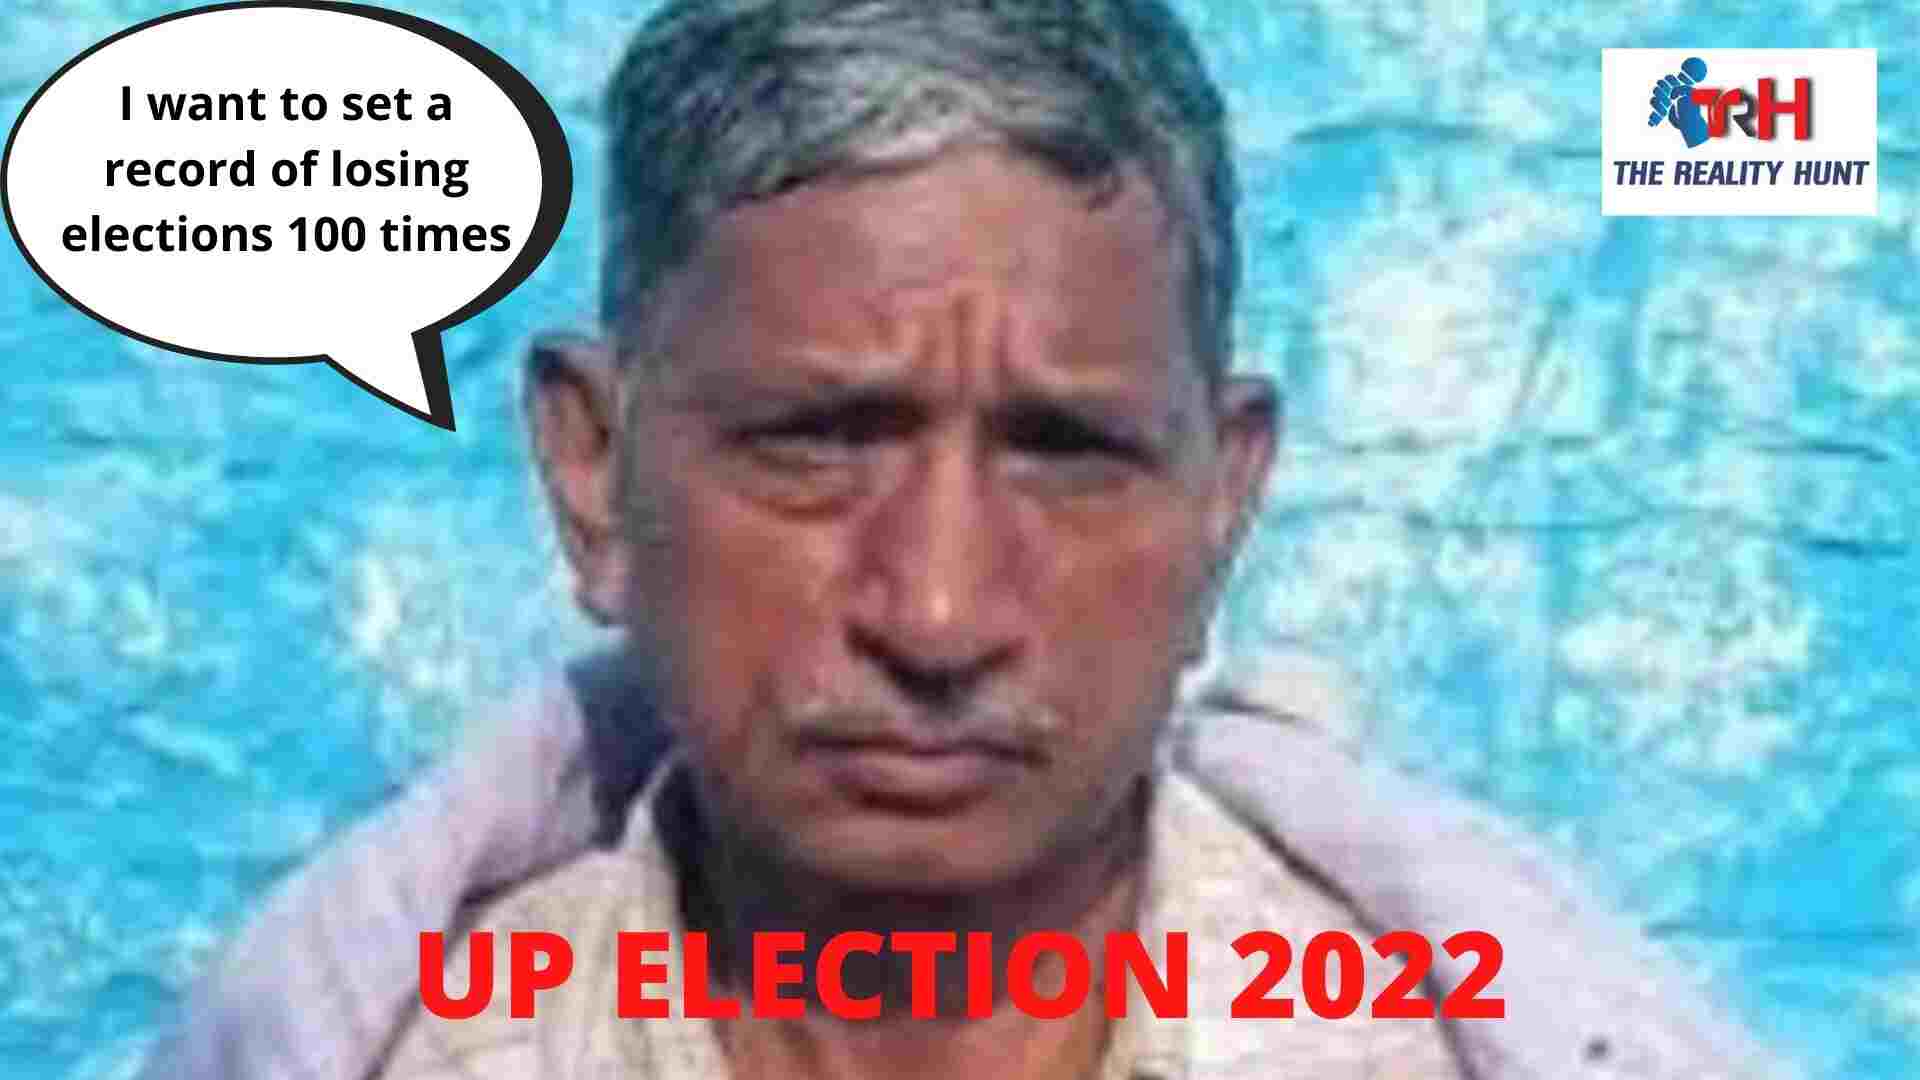 UP ELECTION 2022: UP man set to contest his 94th election and wants to set record 100 defeats